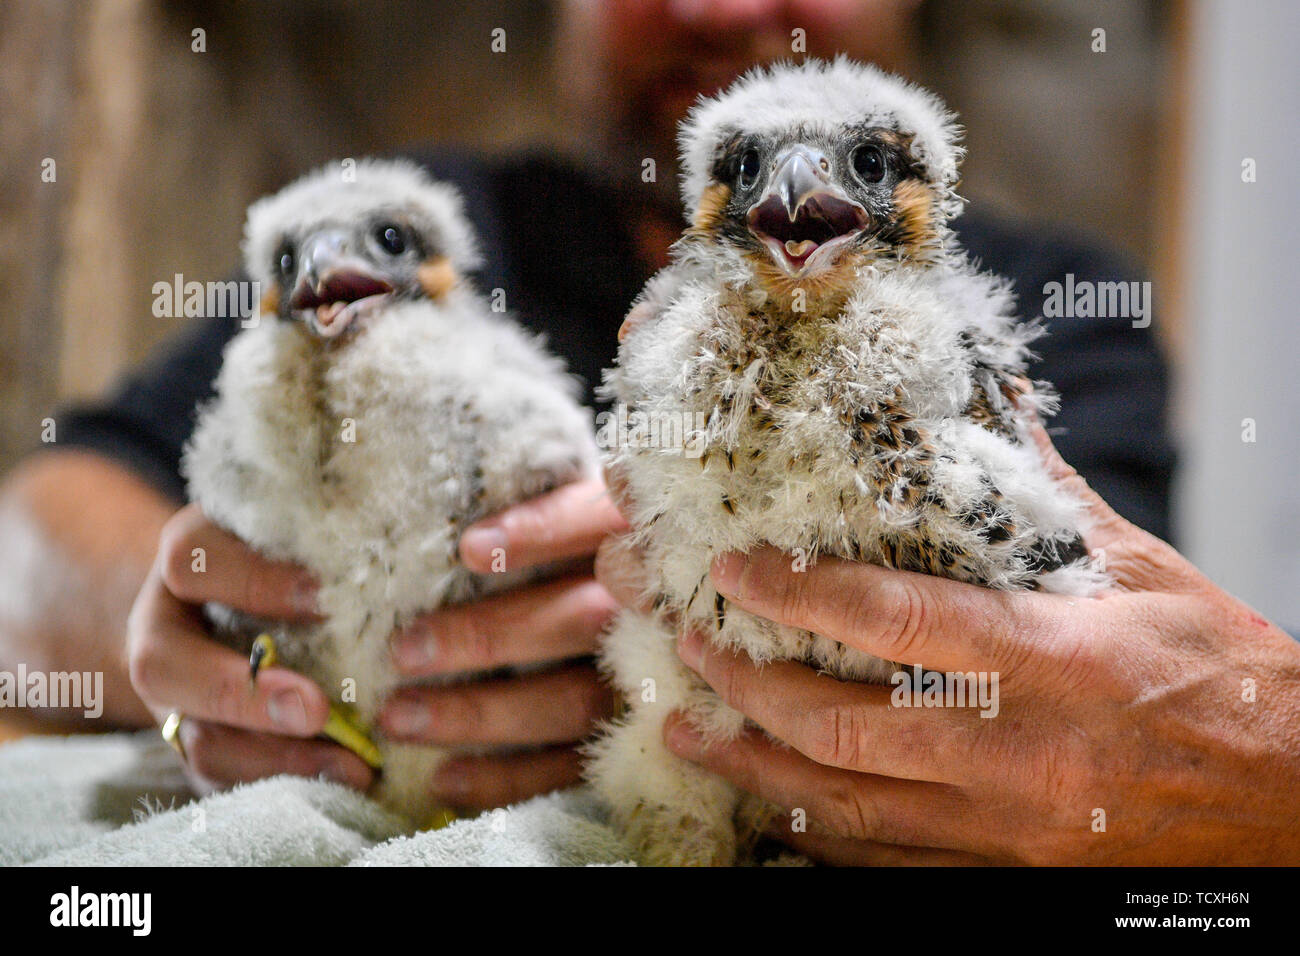 Peregrine falcon chicks are handled in preparation for ringing and data collection by RSPB expert handlers in the tower at Salisbury Cathedral, where four newly hatched birds of prey are nesting along with mum and dad on the South tower. Stock Photo